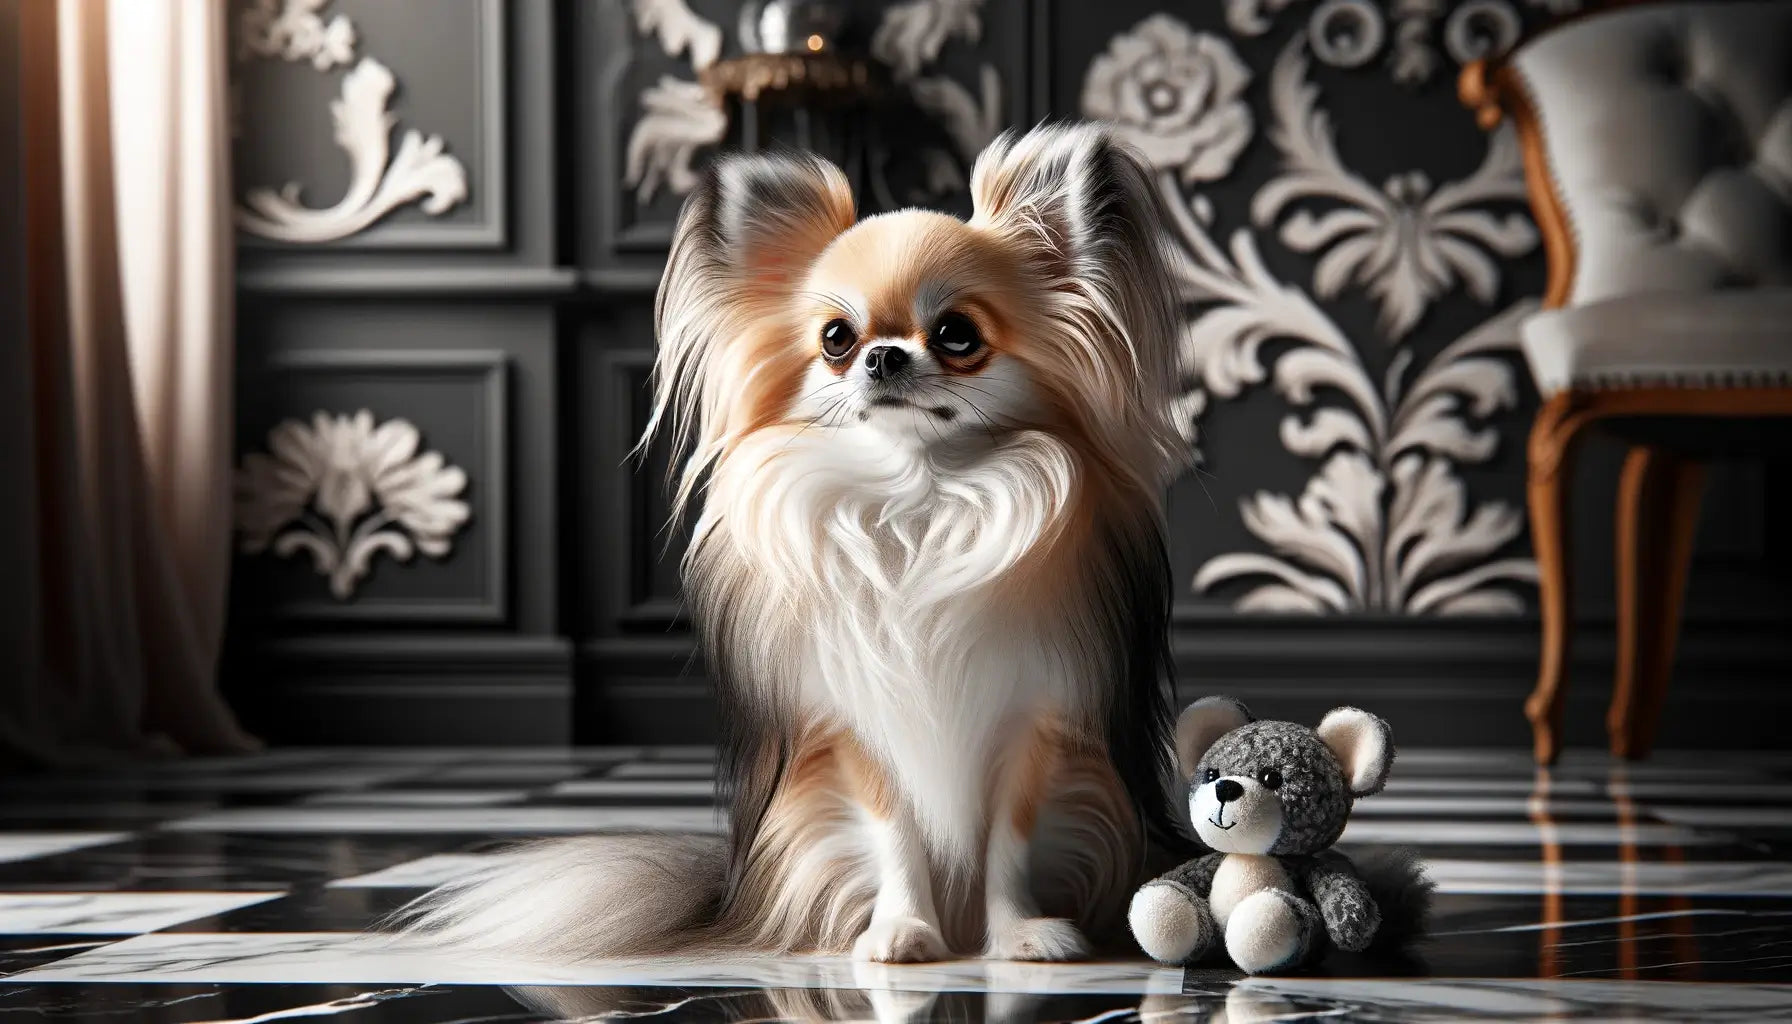 Long-Haired Chihuahua sitting upright on a marbled floor, with its luxurious coat standing out against a black and white patterned backdrop.